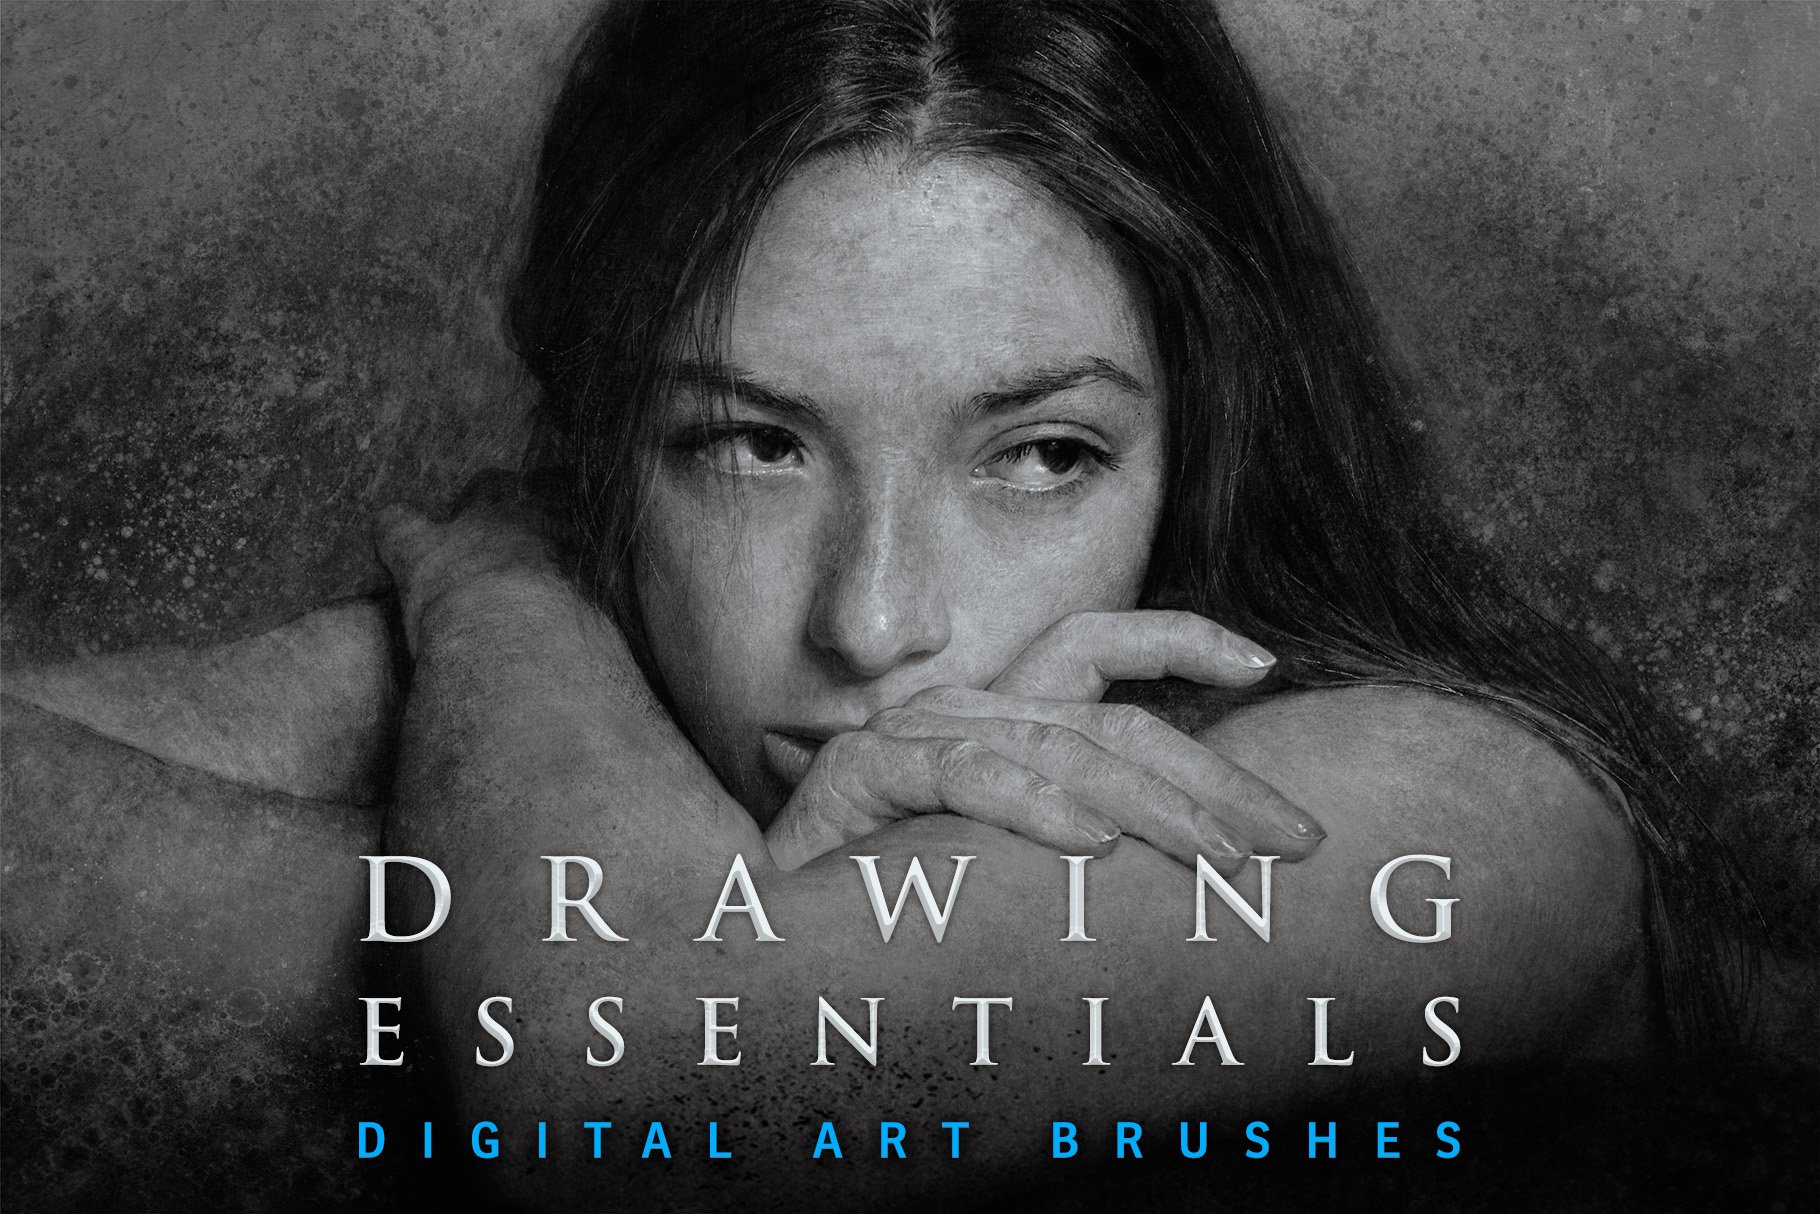 Ultimate Brush Set for Painting Portraits - Design Cuts